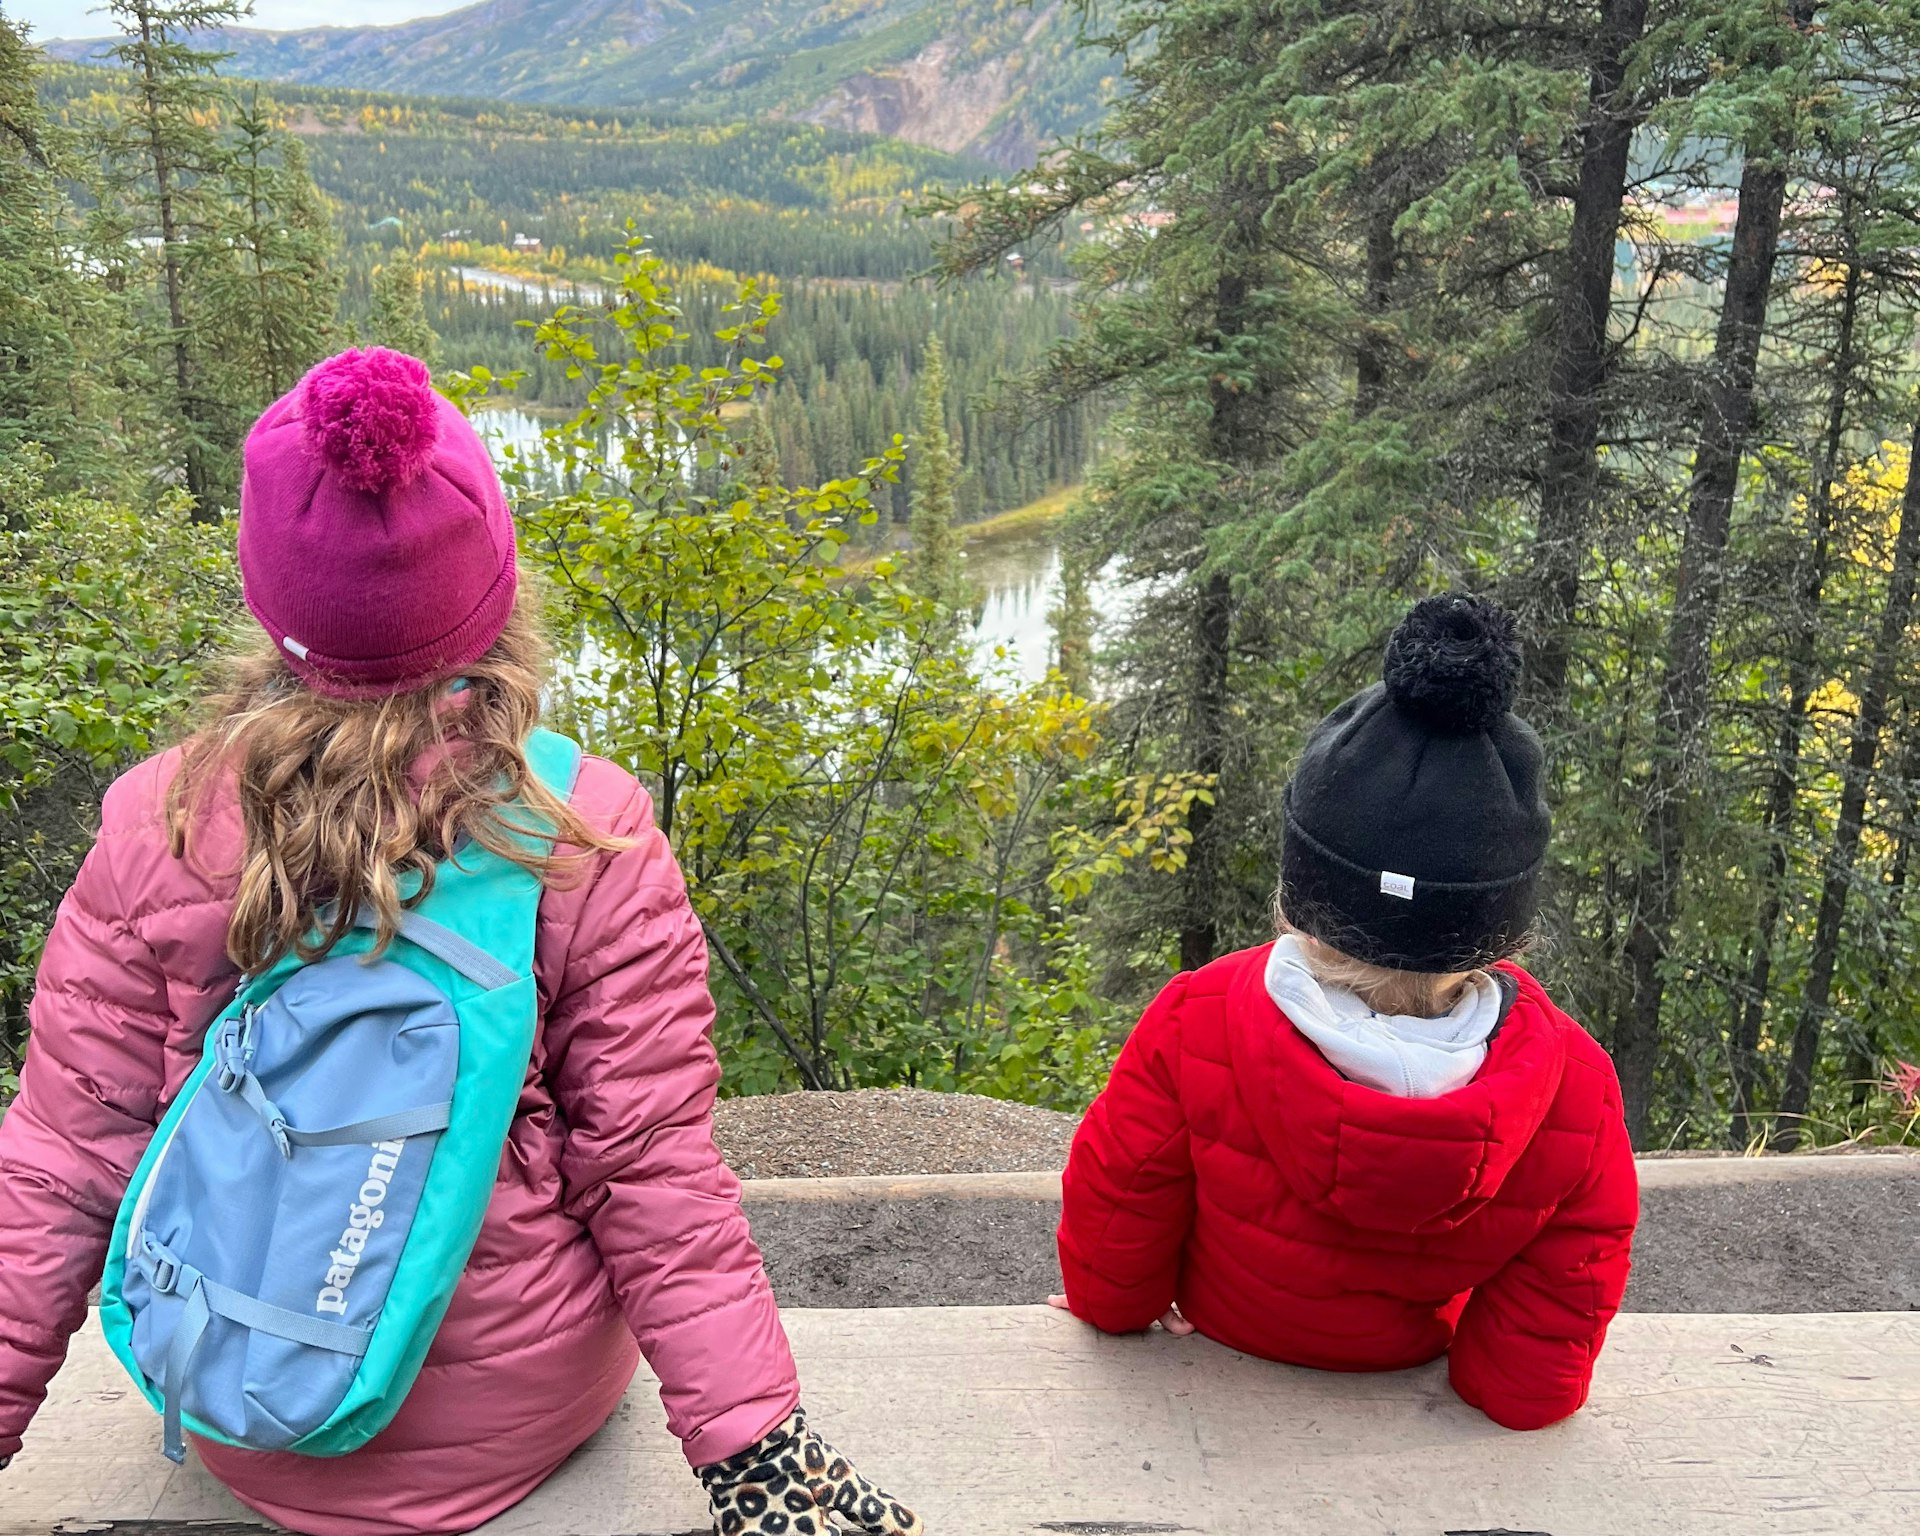 Two children in bobble hats look out across Beaver Pond in Alaska which is surrounded by evergreen trees